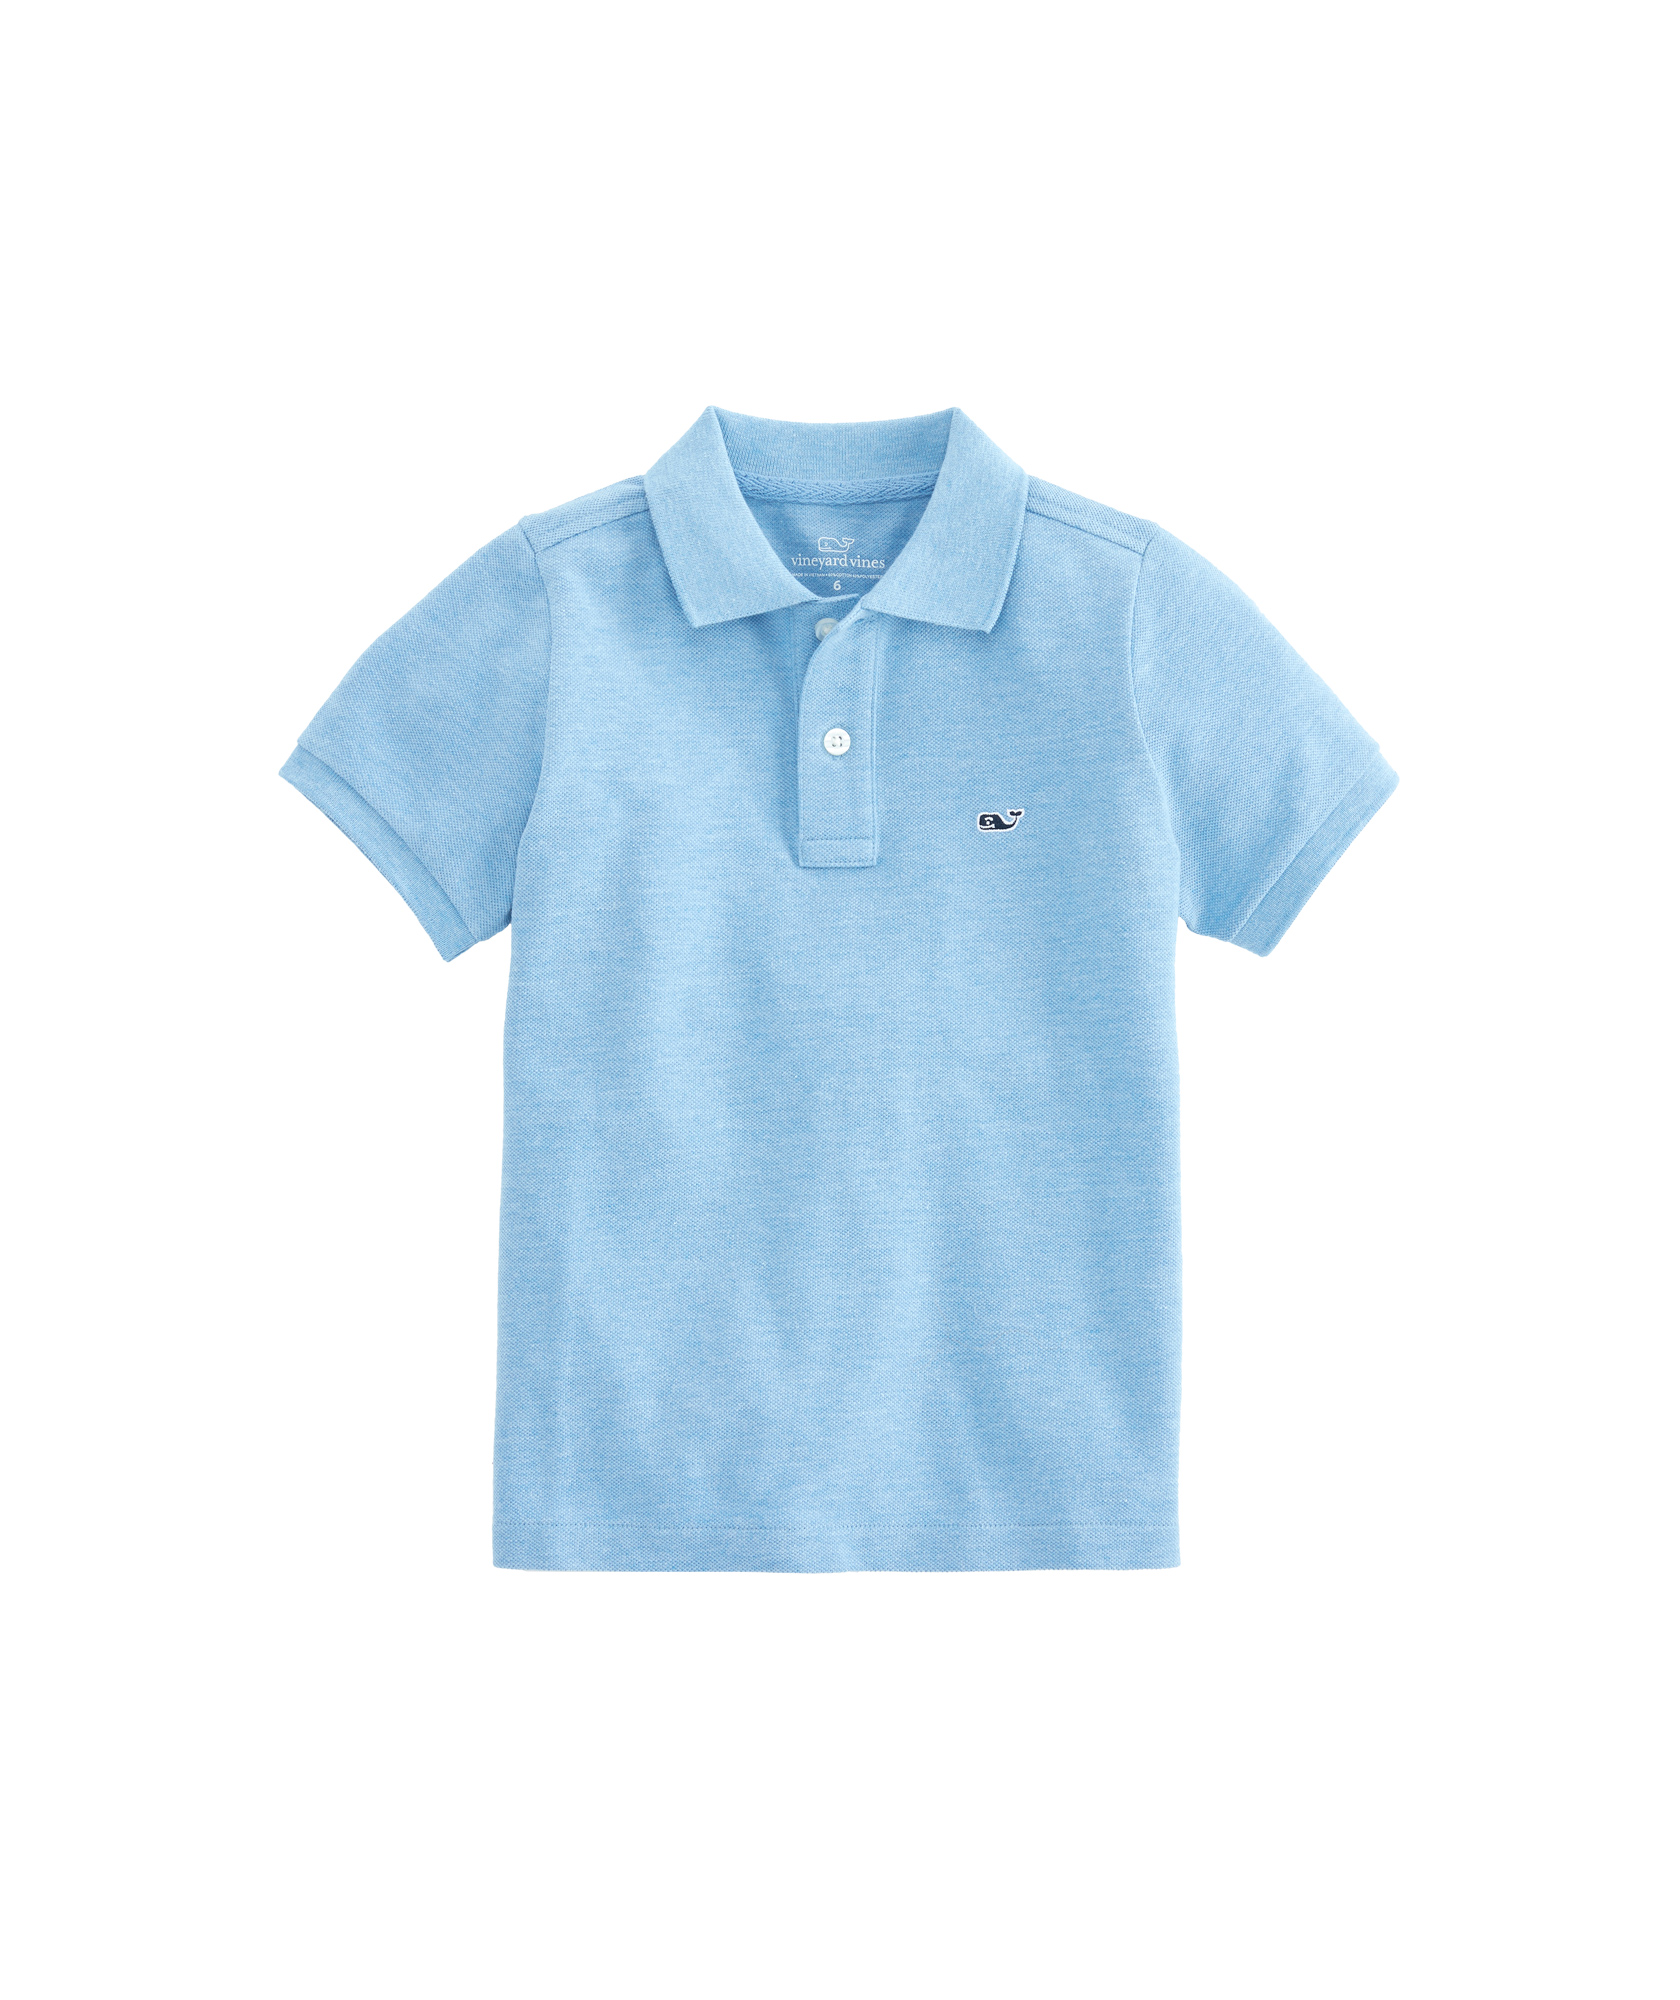 Shop Boys Stretch Pique Heathered Polo at vineyard vines